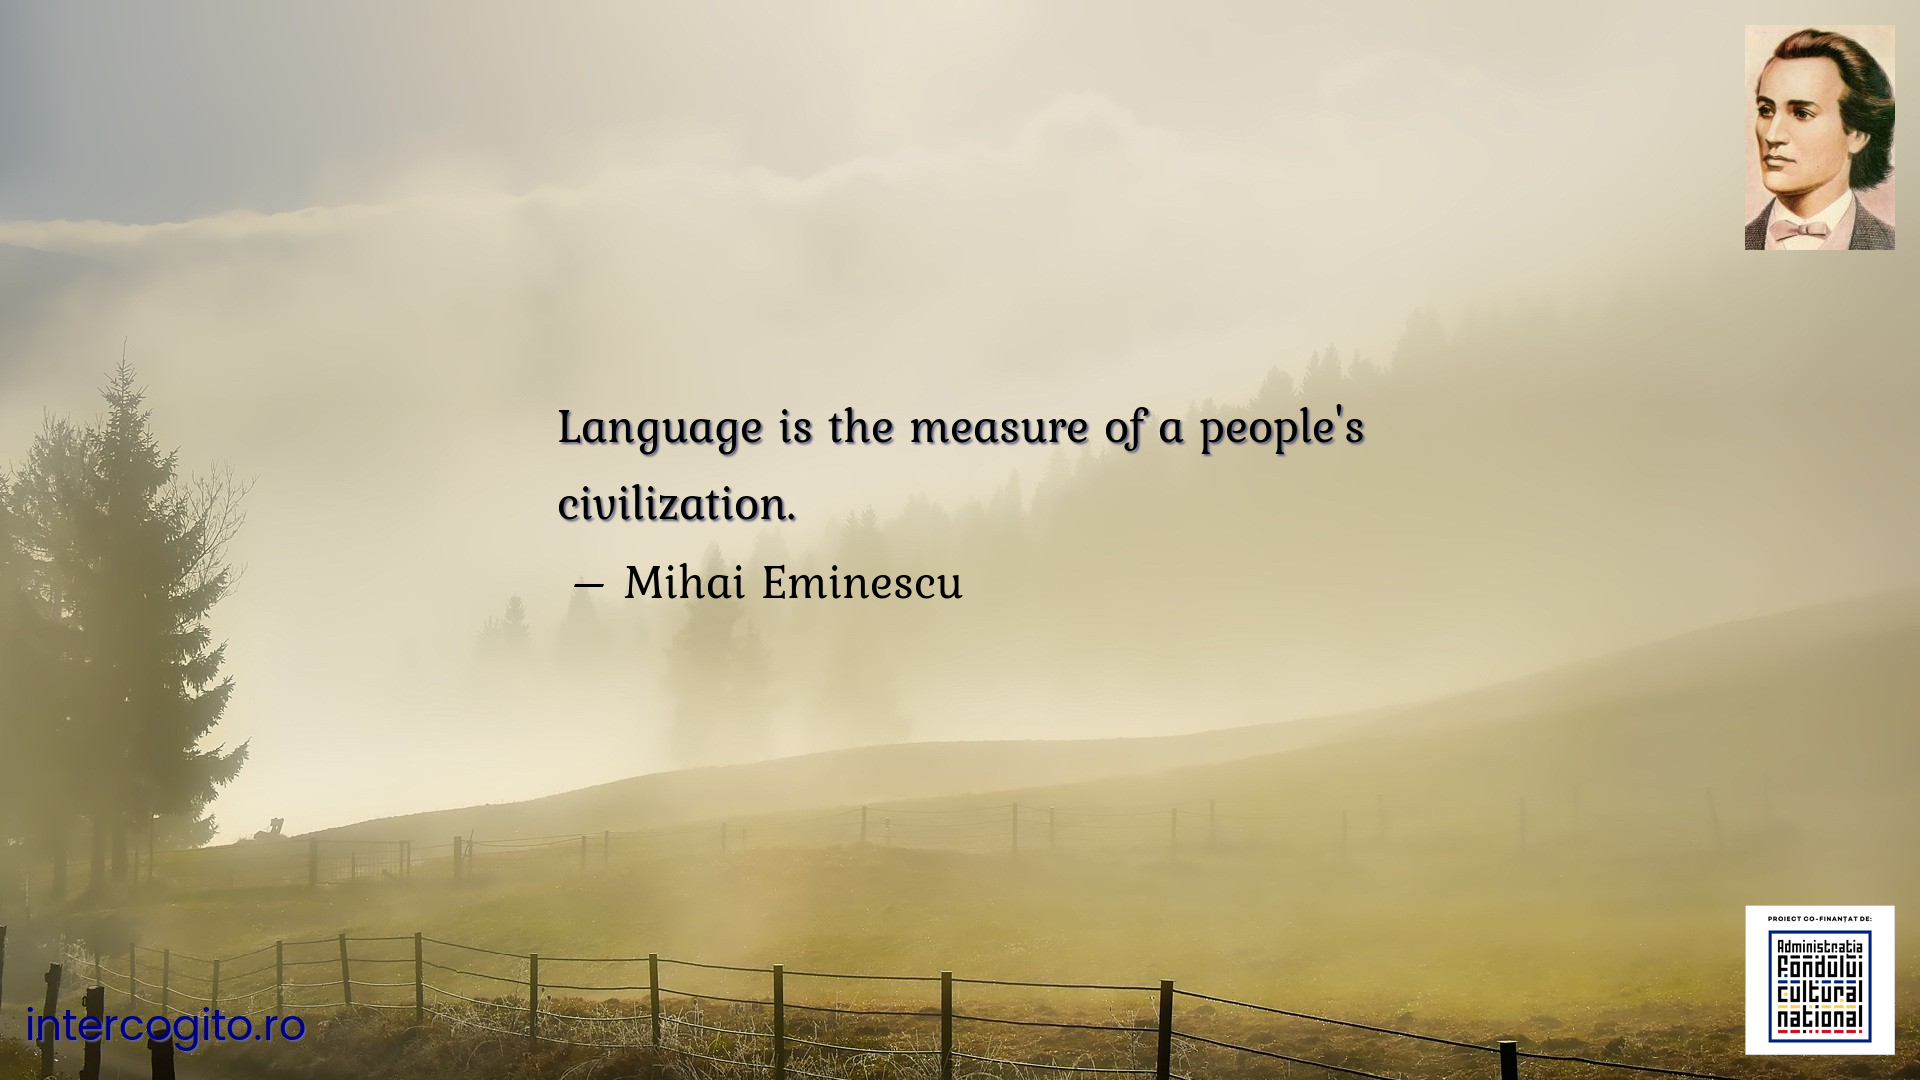 Language is the measure of a people's civilization.